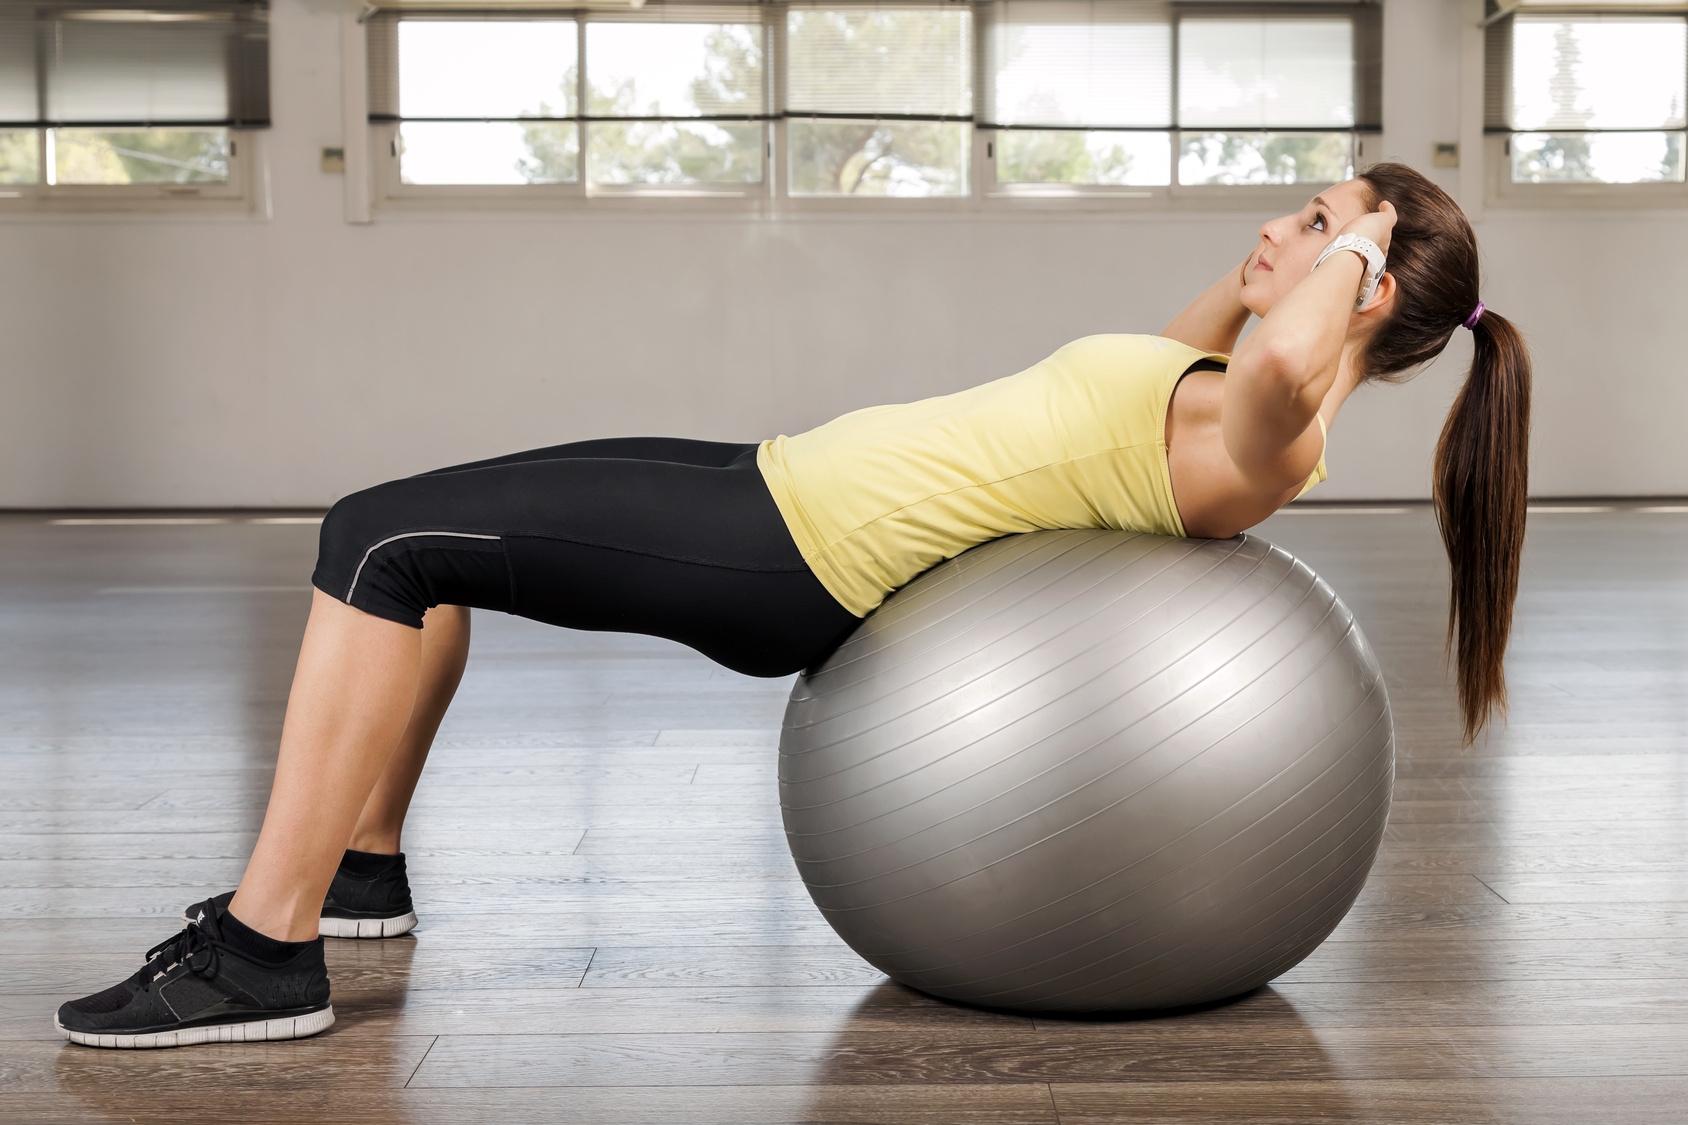 Young woman doing abdominal on a exercise ball